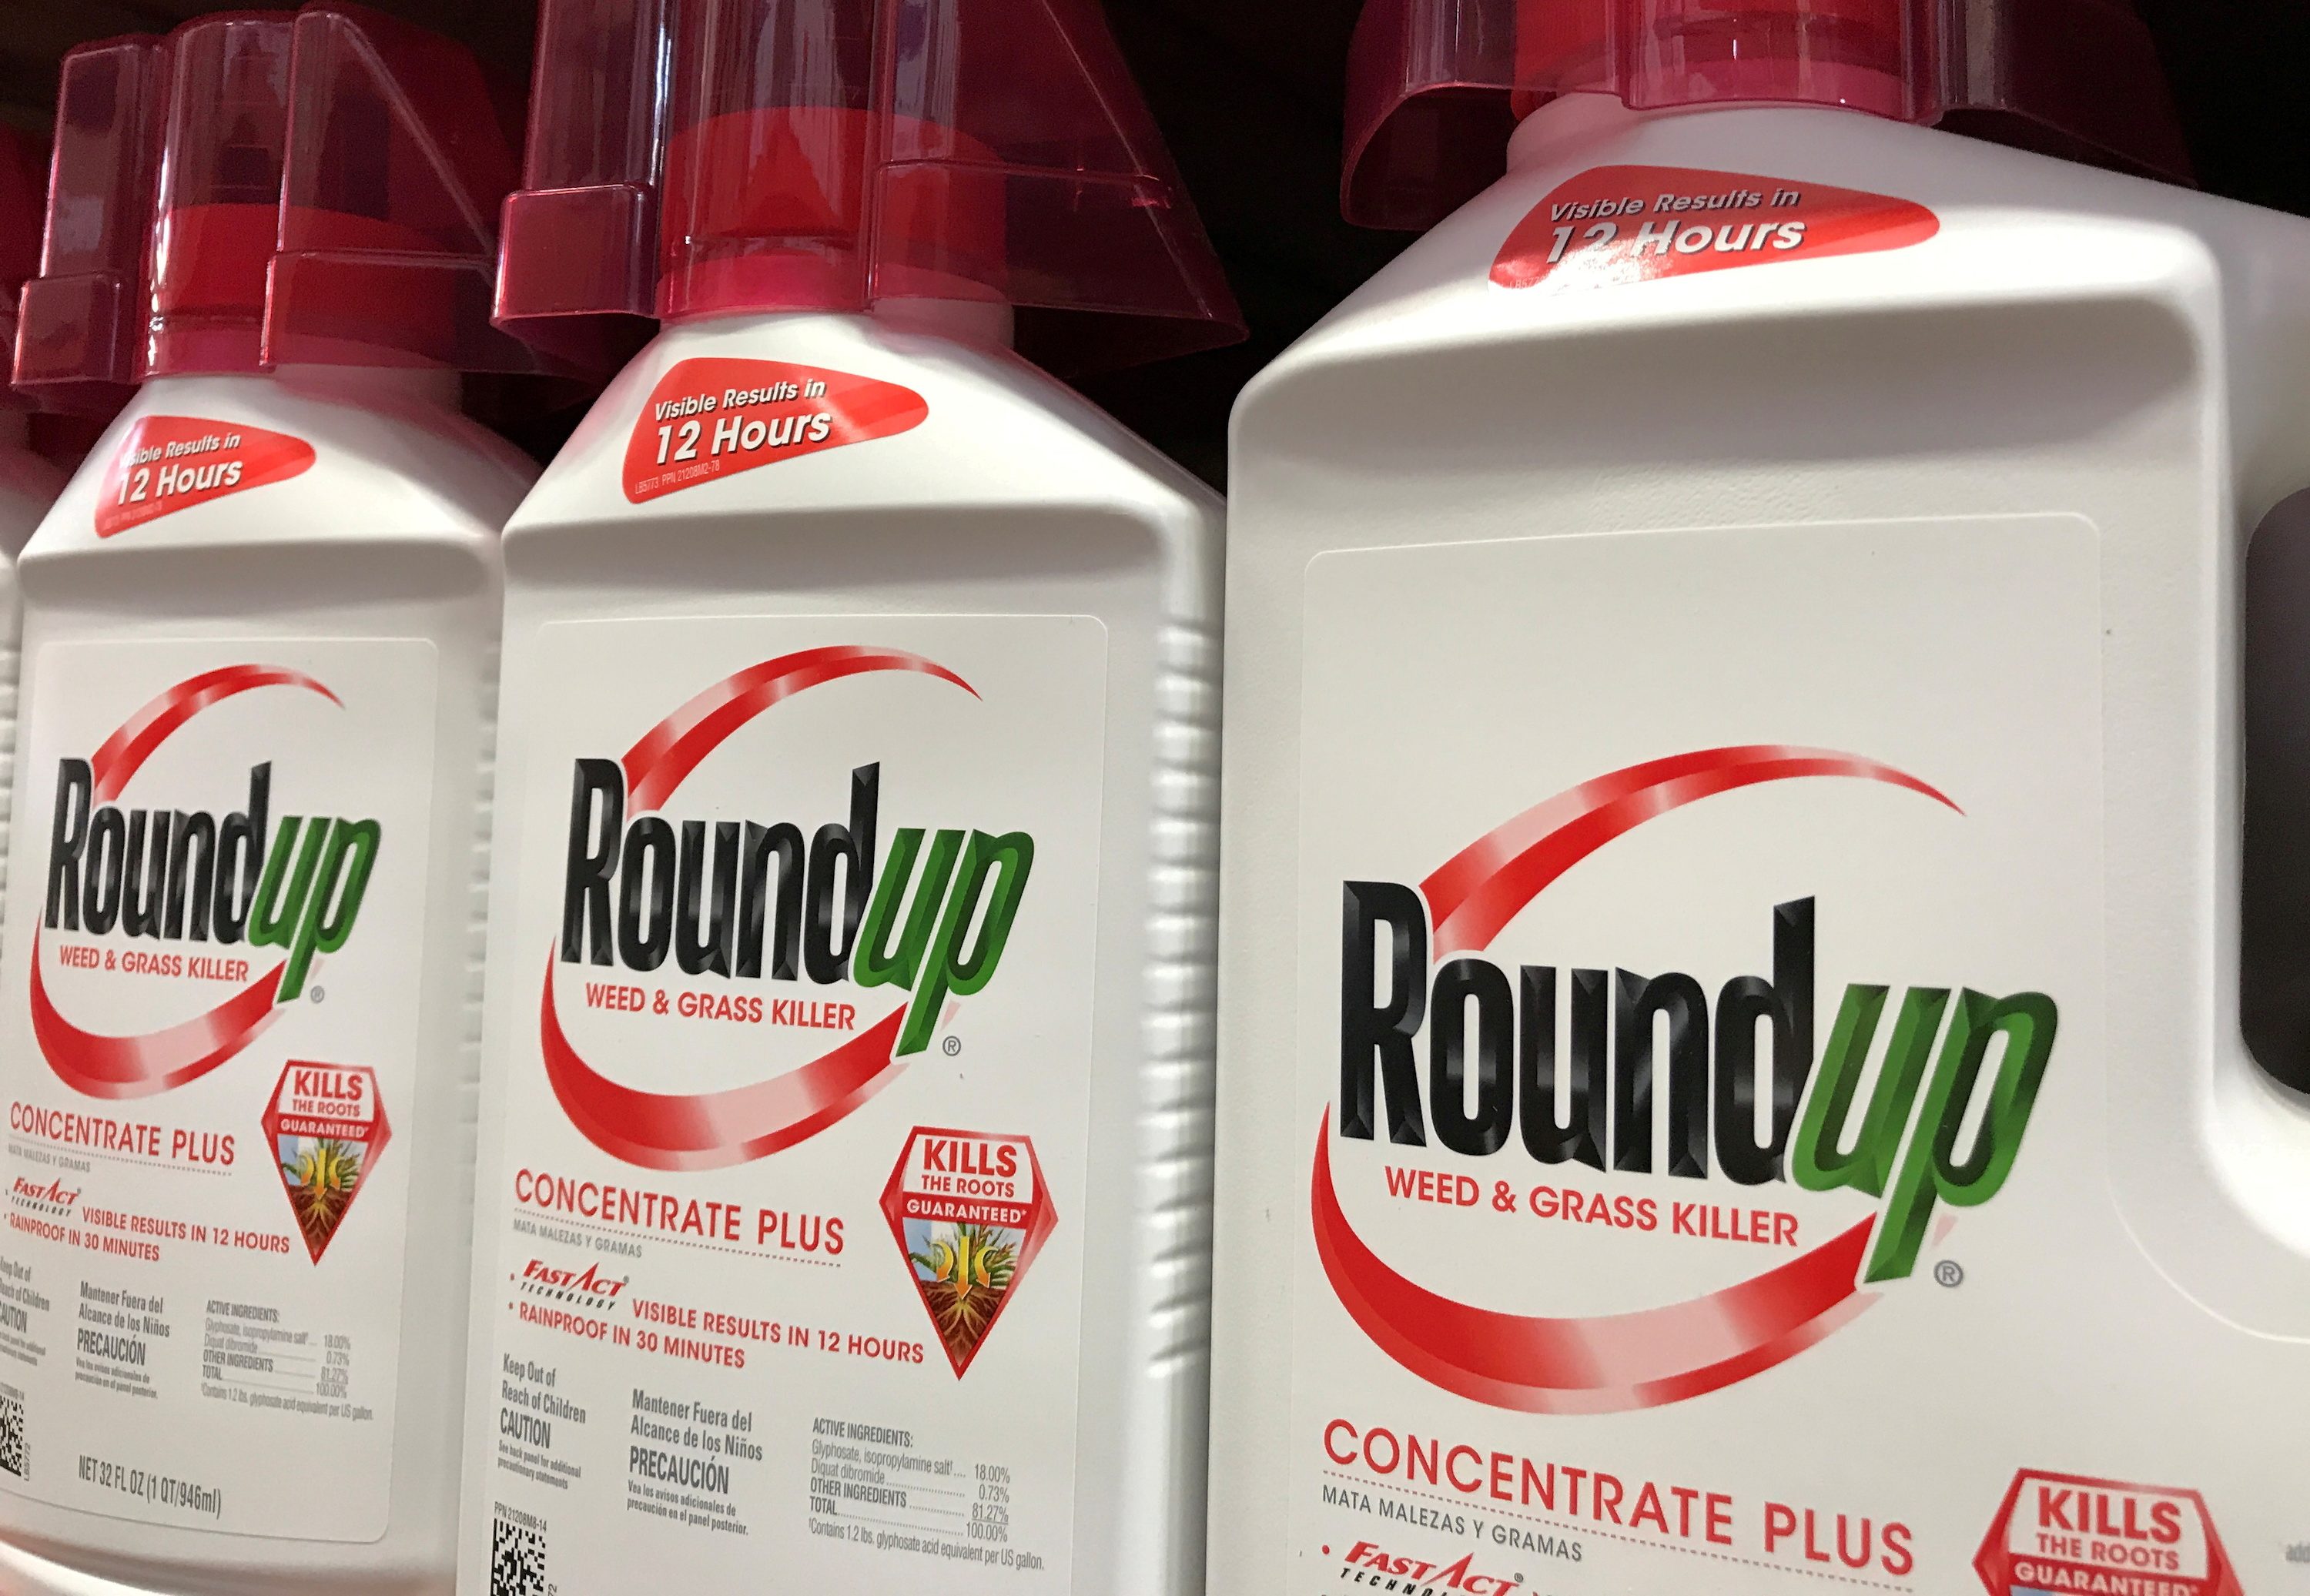 US Supreme Court rejects Bayer bid to nix Roundup weedkiller suits